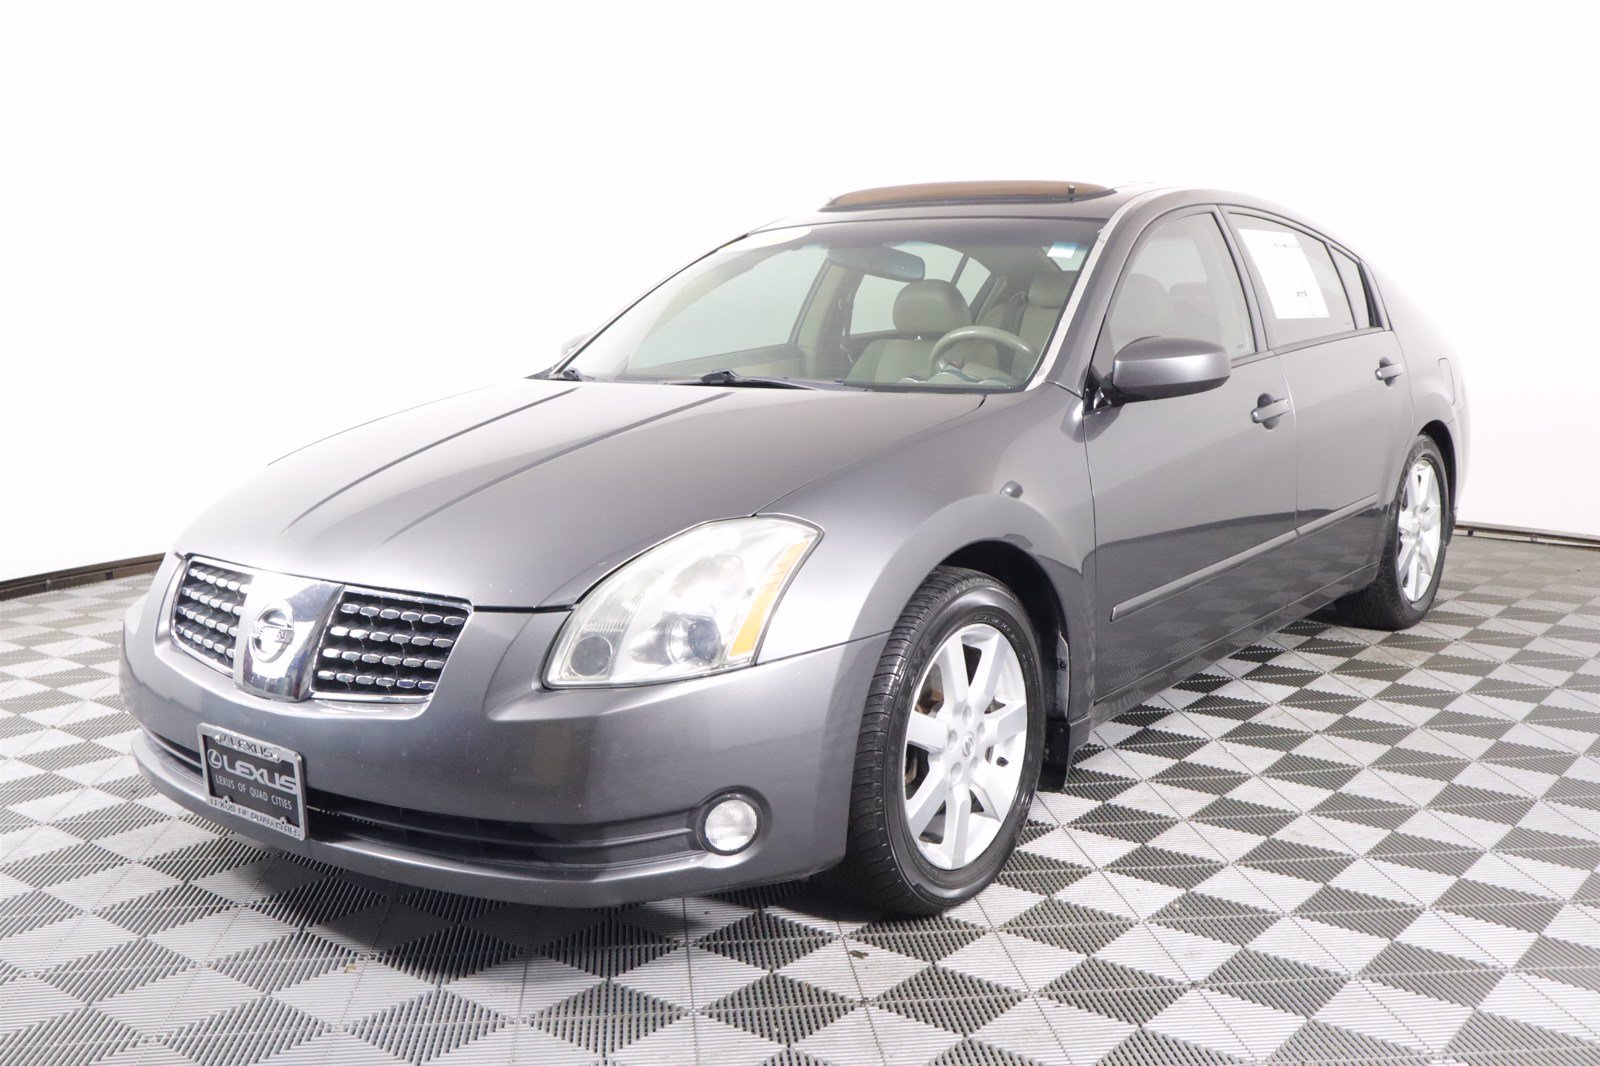 Pre-Owned 2006 Nissan Maxima 3.5 SL 4dr Car in Davenport #L20702C